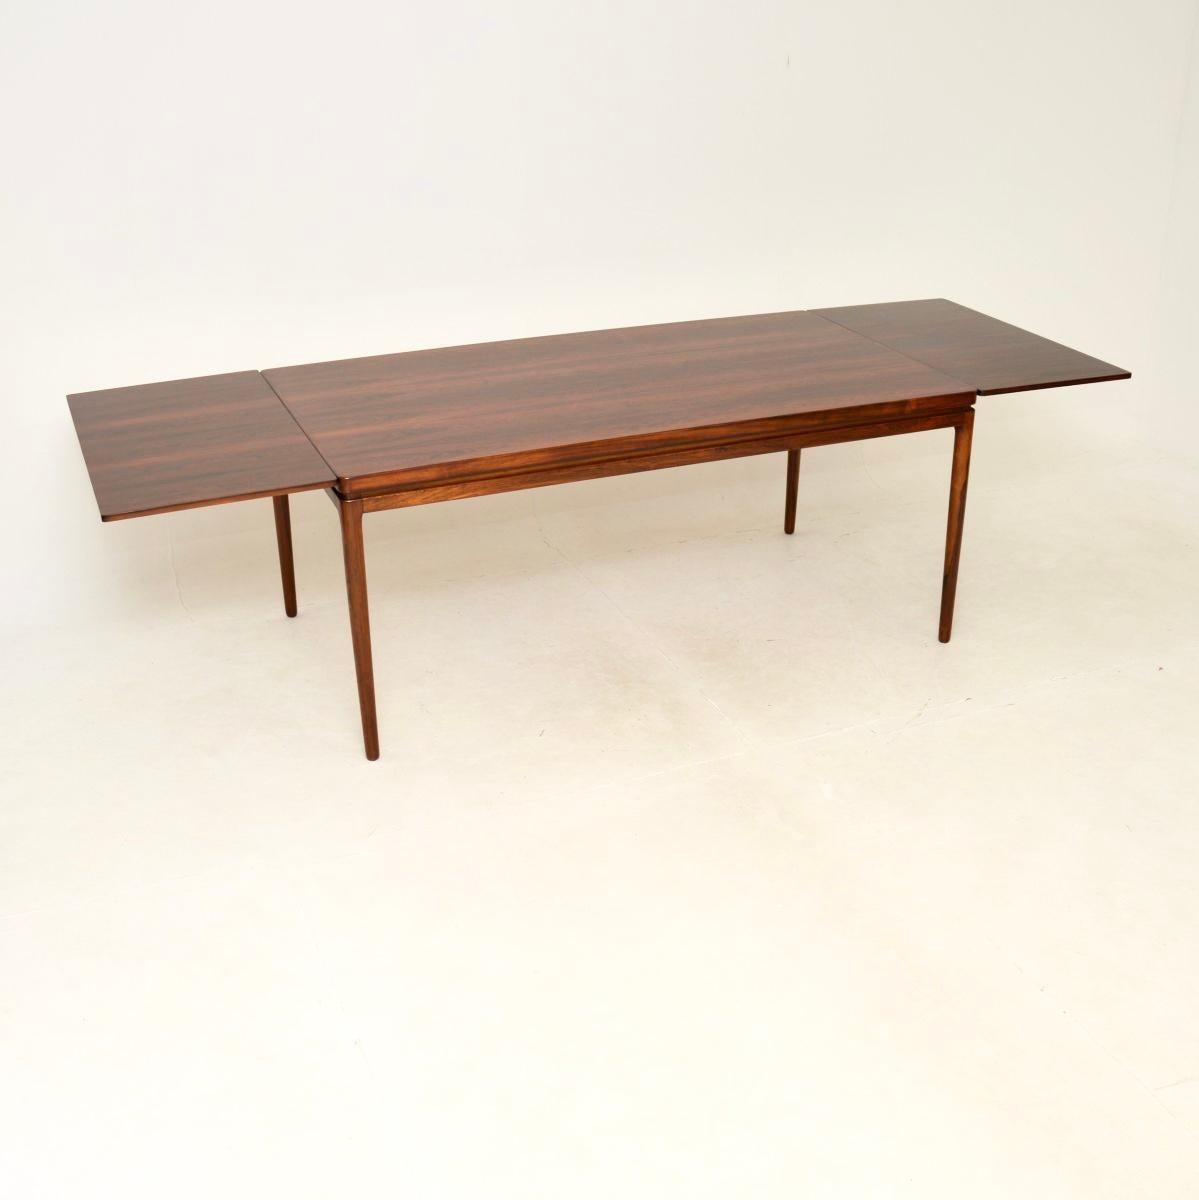 An absolutely stunning Danish vintage dining table by Johannes Andersen.

It is of superb quality and is a great size. It extends to comfortably seat ten people, and could seat twelve at a push. The leaves are completely flat and must be stored